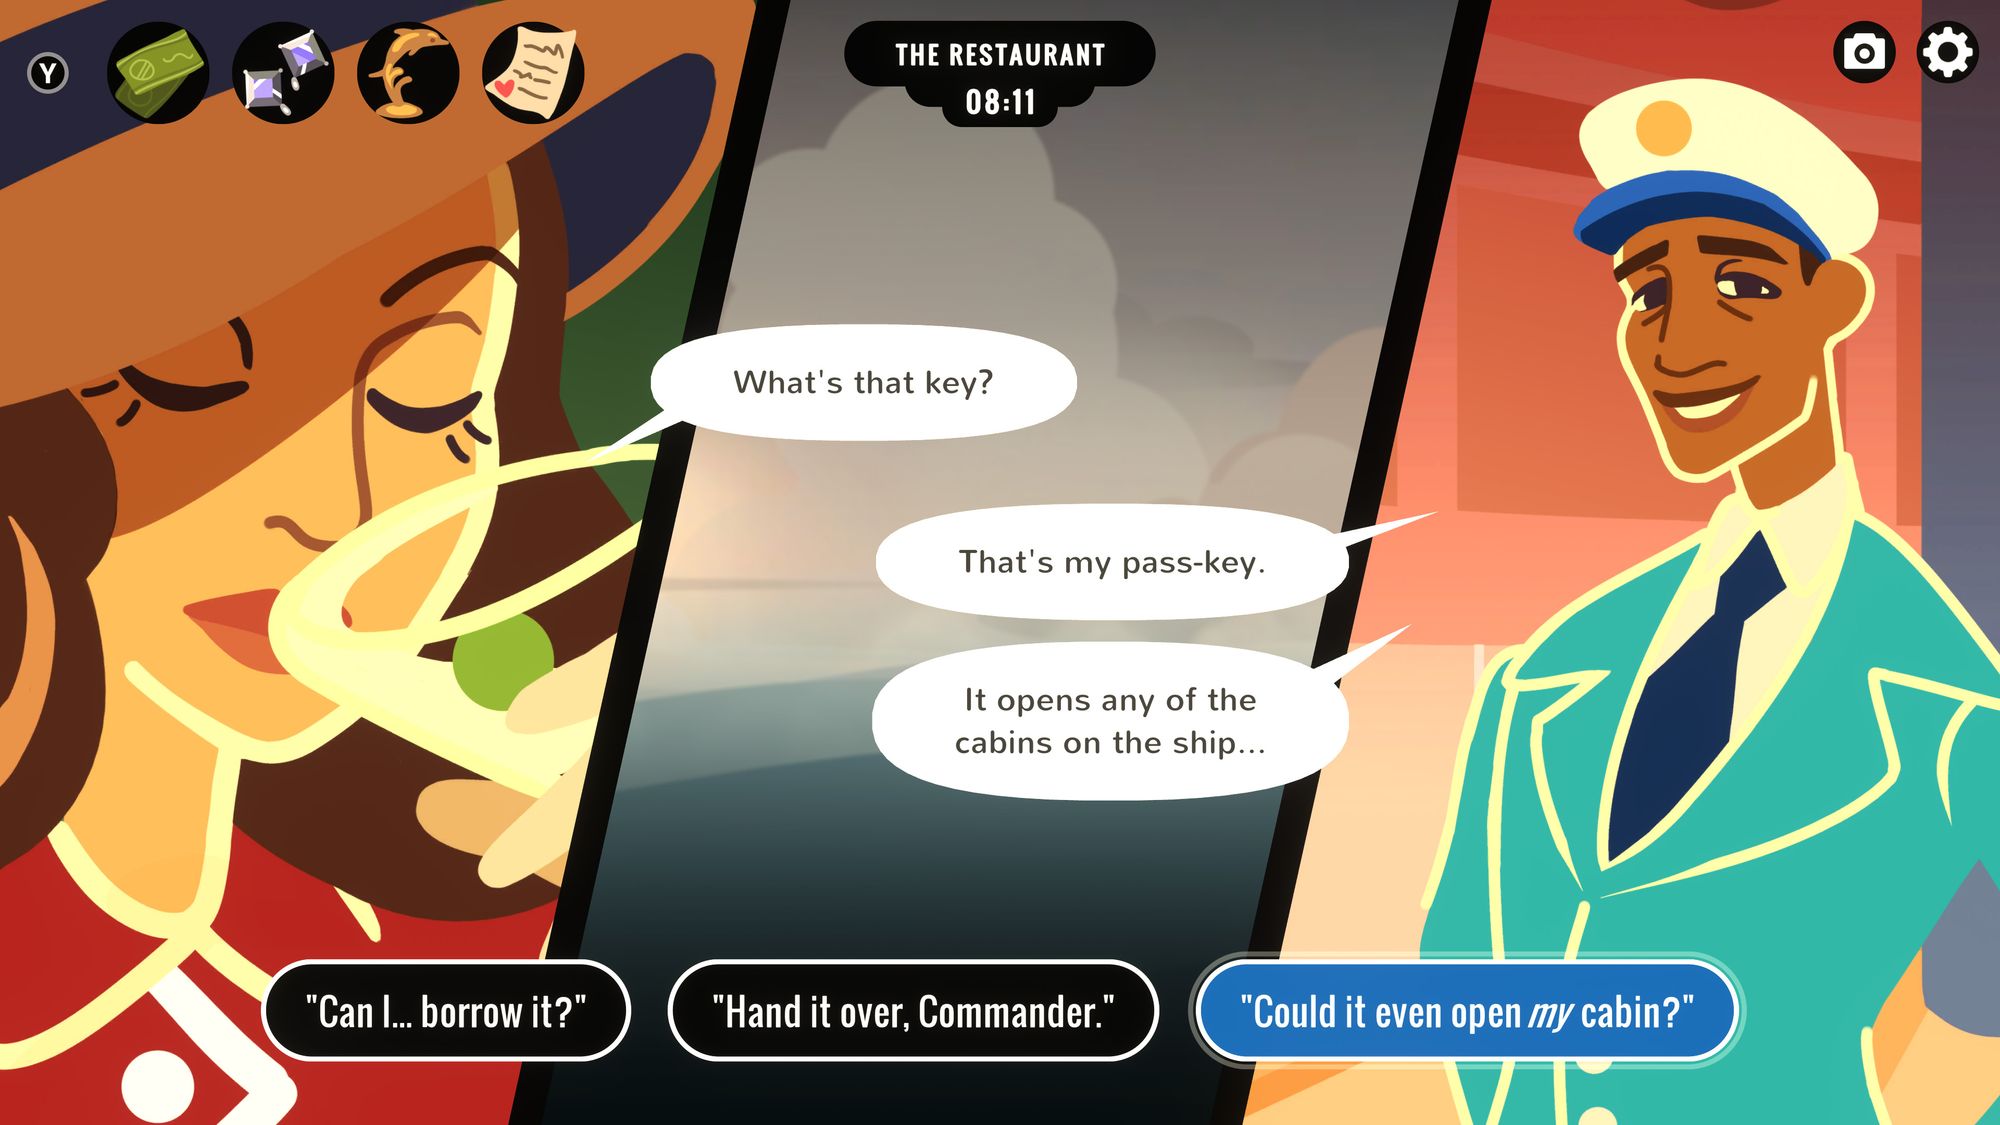 What is immersion? Games like Inkle’s Overboard create immersion through absorption by getting the right level of challenge. There’s a lot we can can learn from games about flow and theatre. Here Veronica (the glamorous protagonist, who is drinking a martini) persuades the Commander to give her his pass-key to all the doors on the ship.